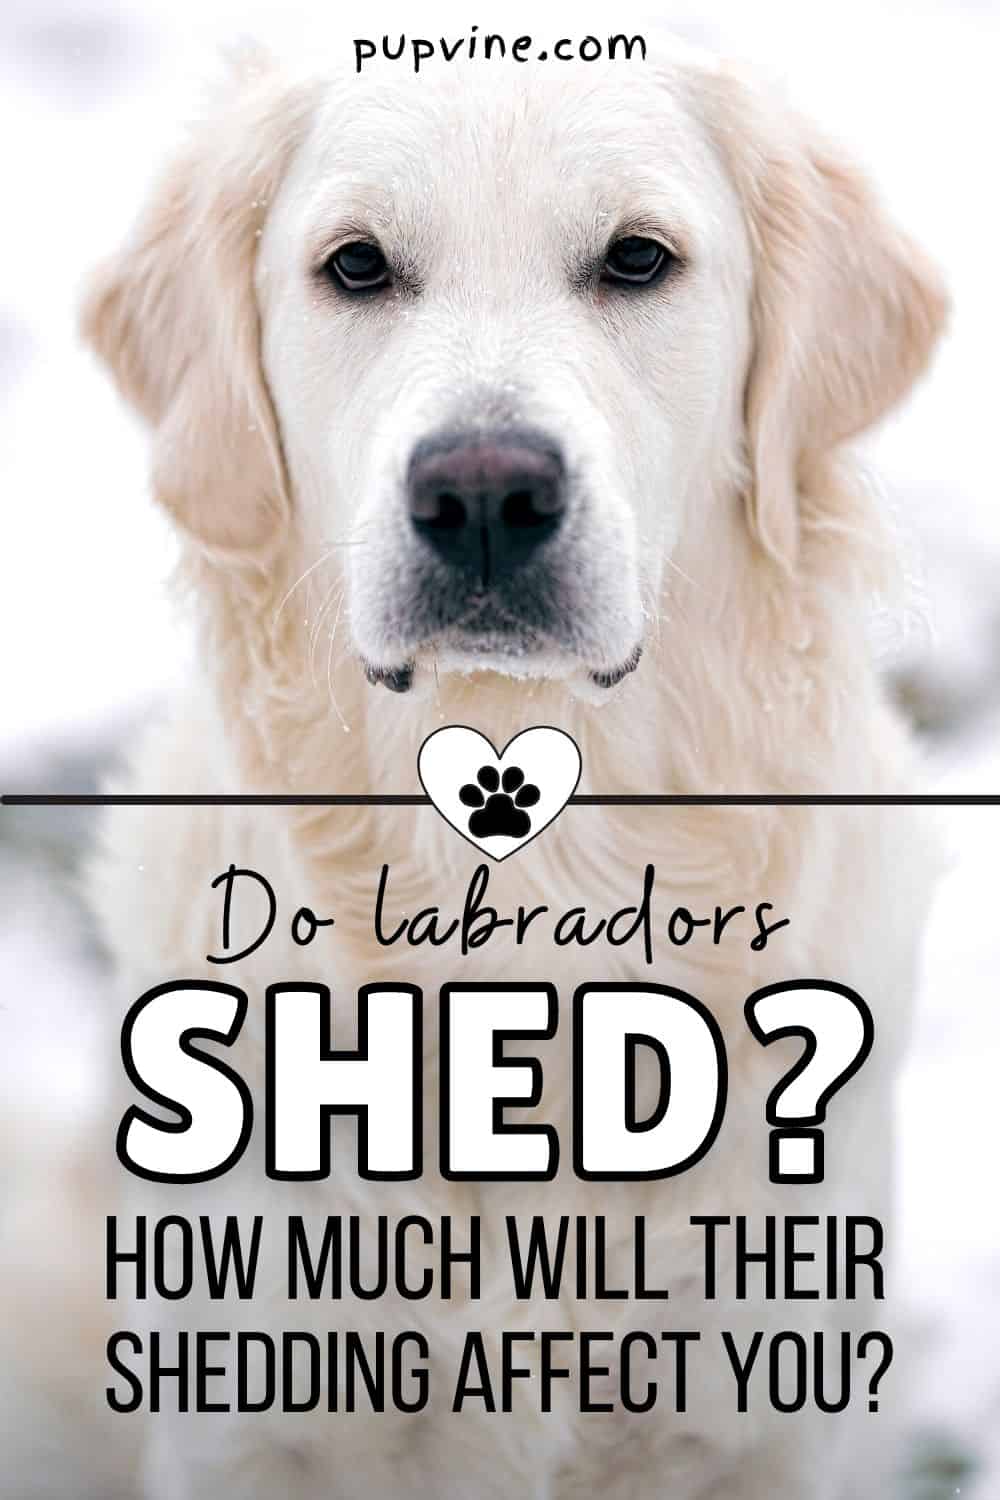 Do Labradors Shed? How Much Will Their Shedding Affect You?